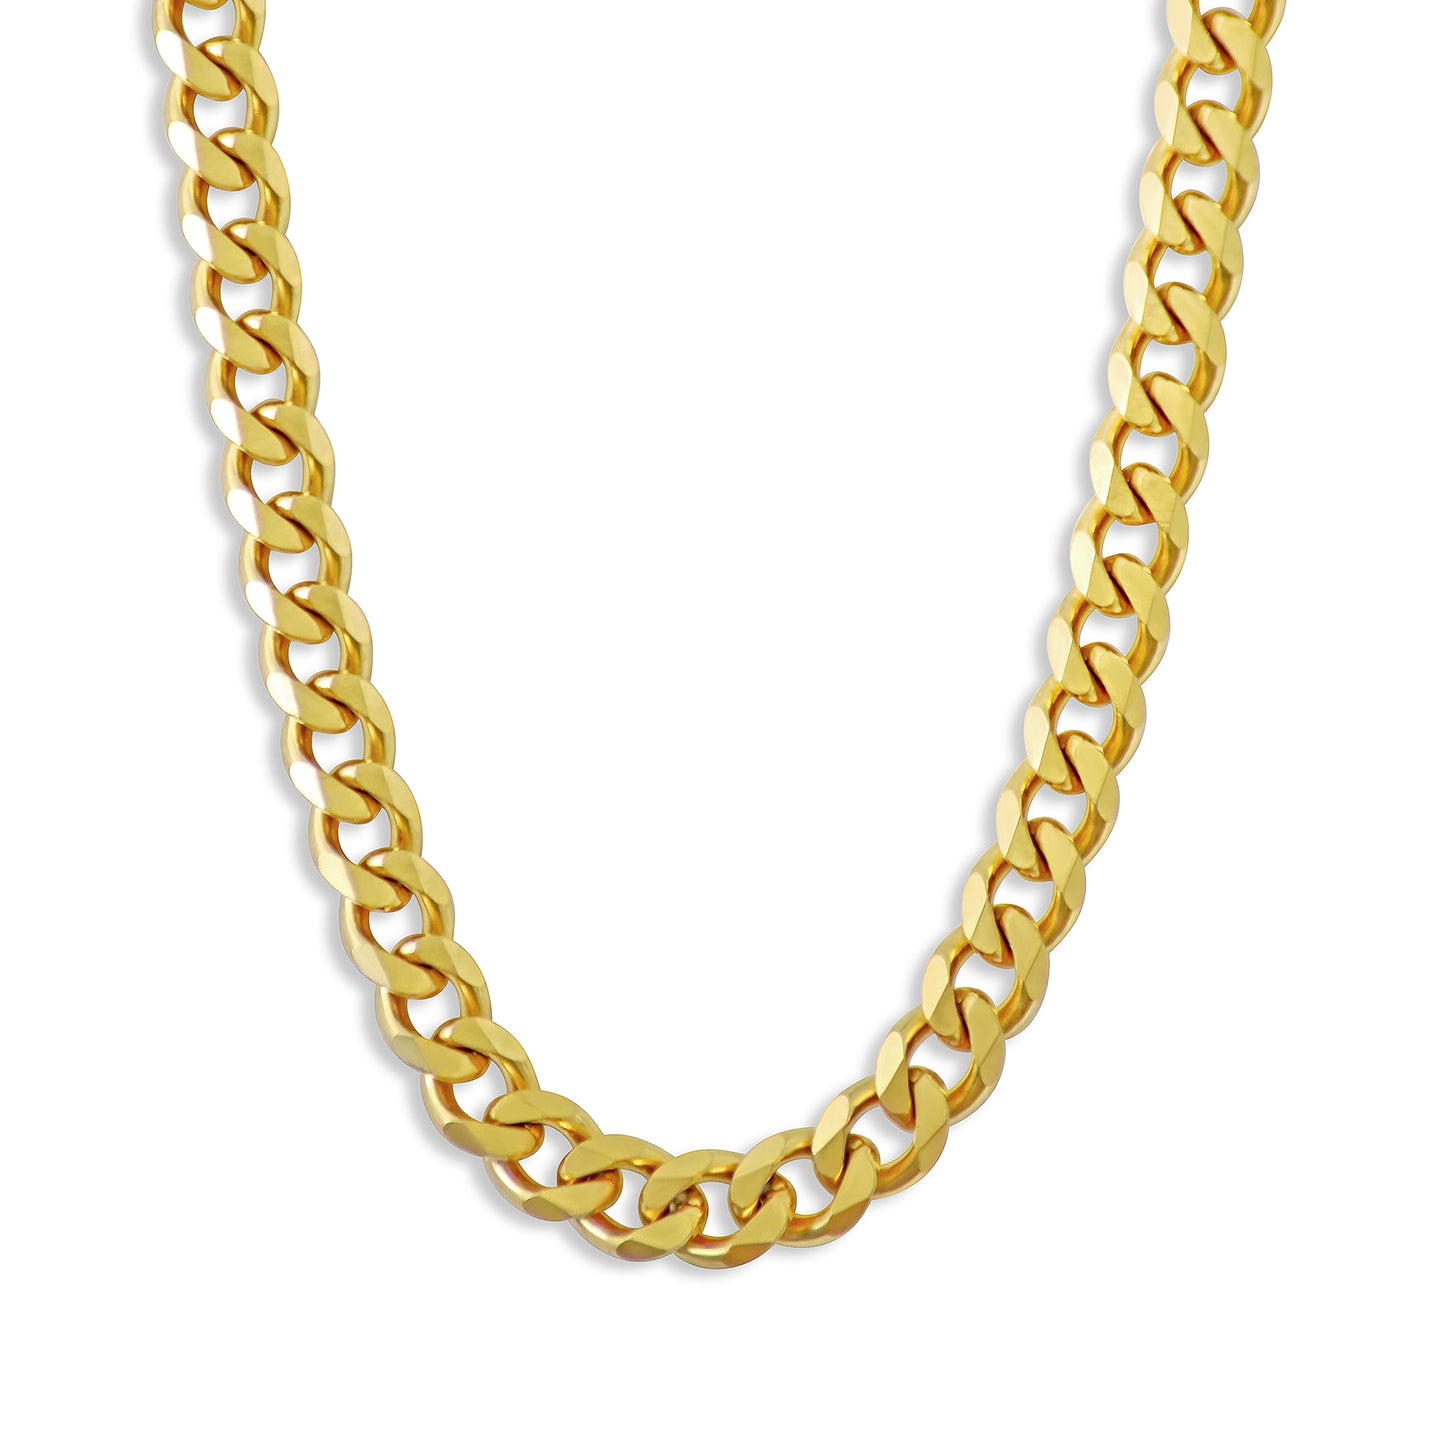 5mm Chain - Gold